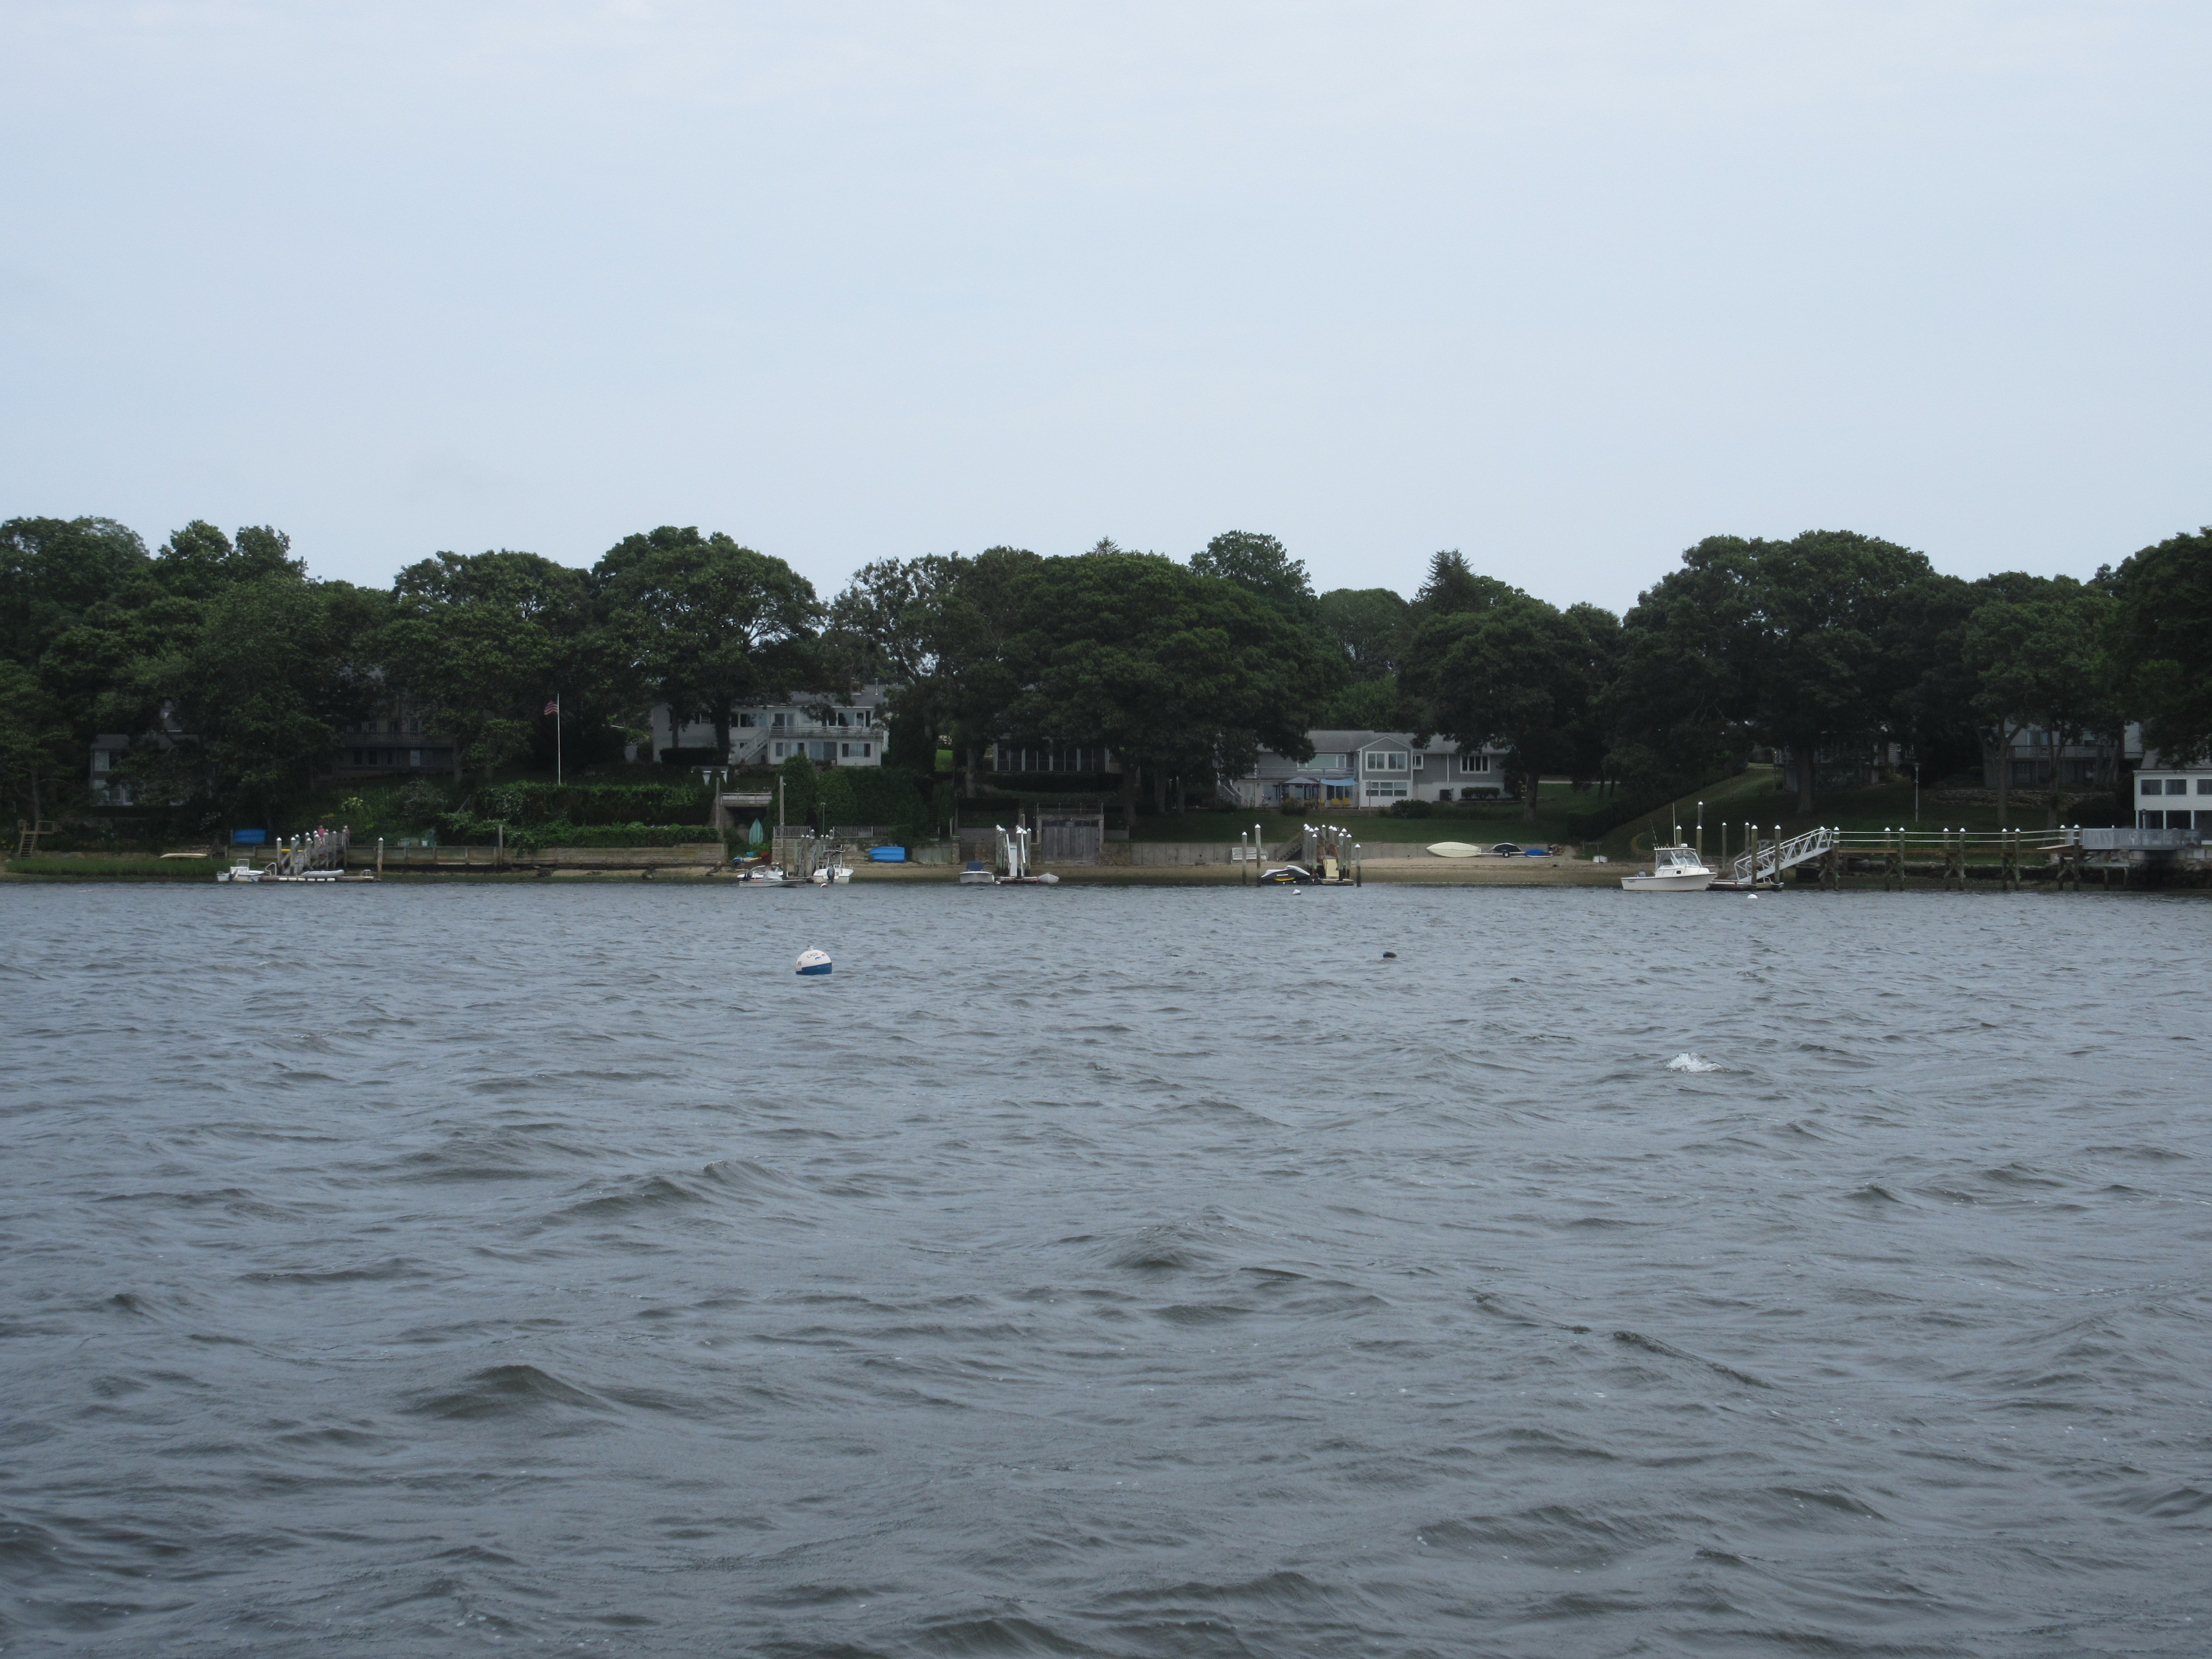 The view from where we anchored in Point Judith Pond